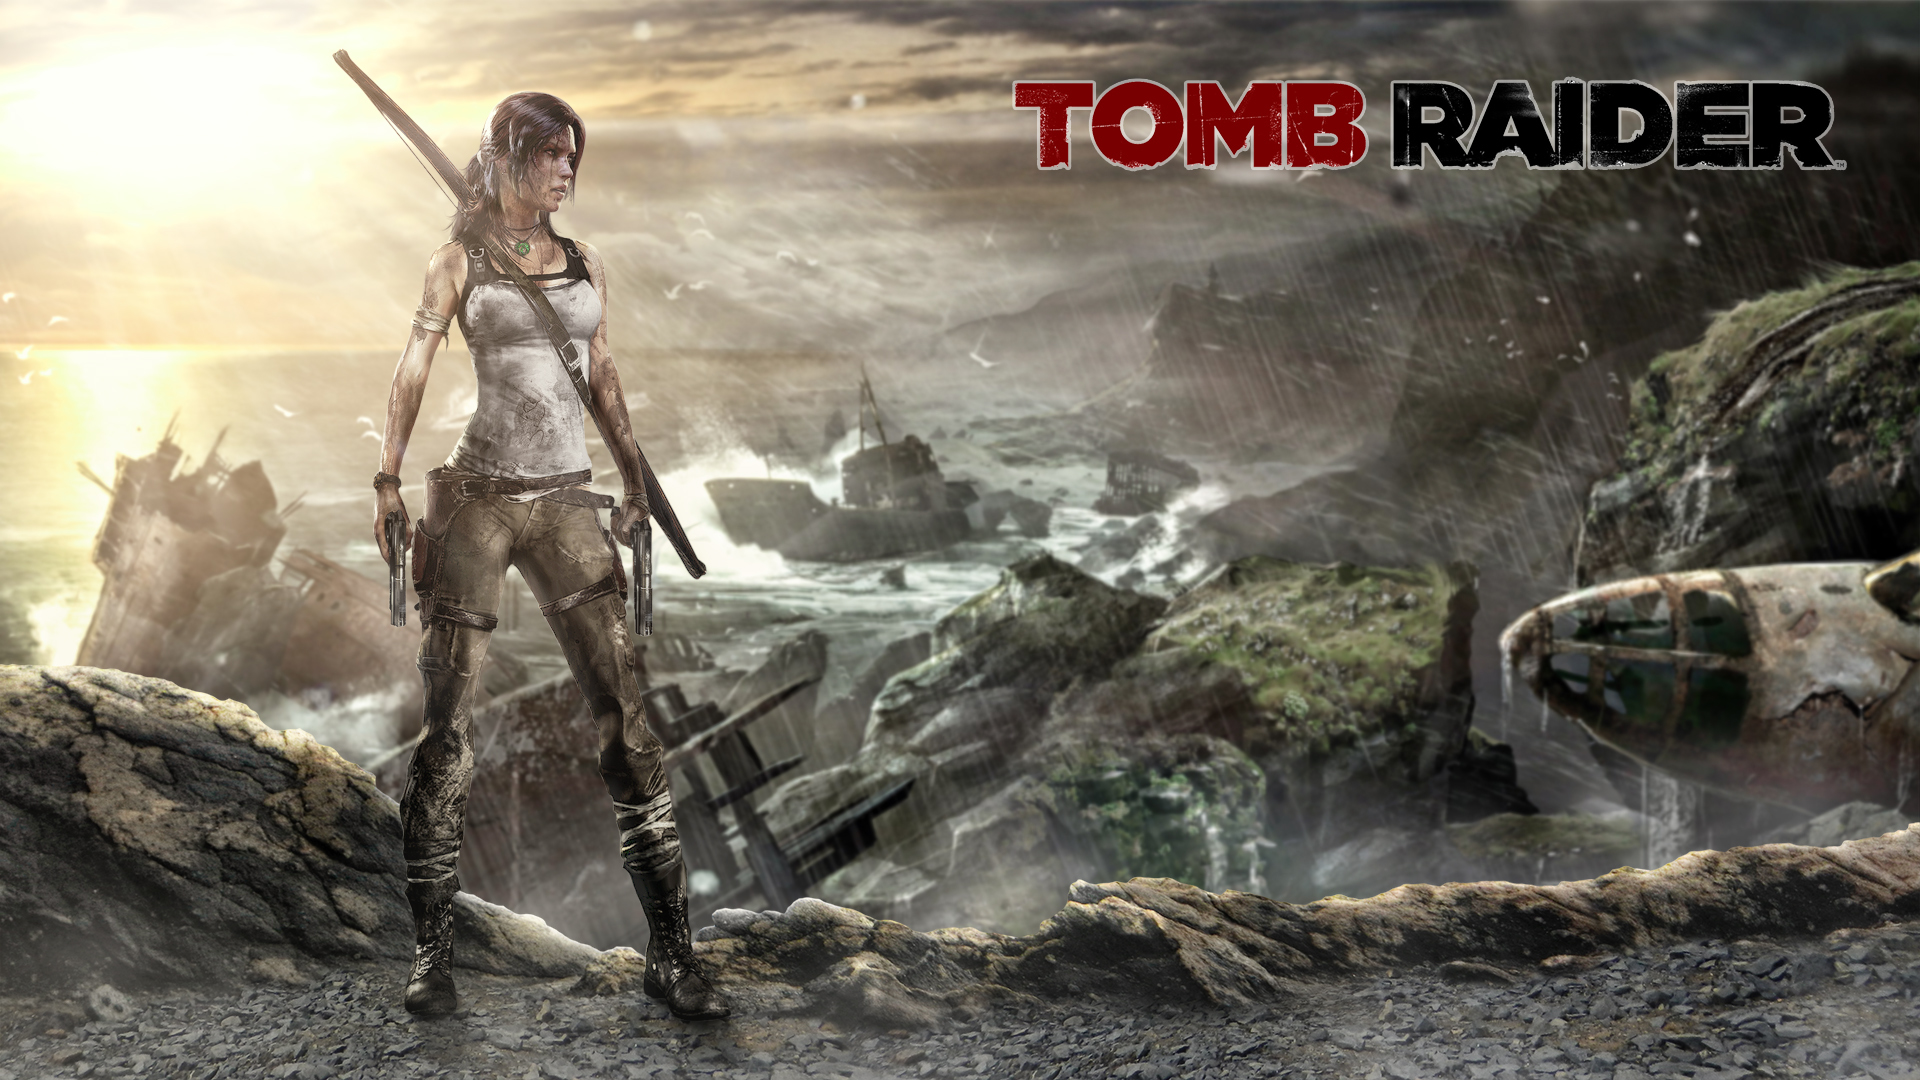 Tomb raider in steam фото 30